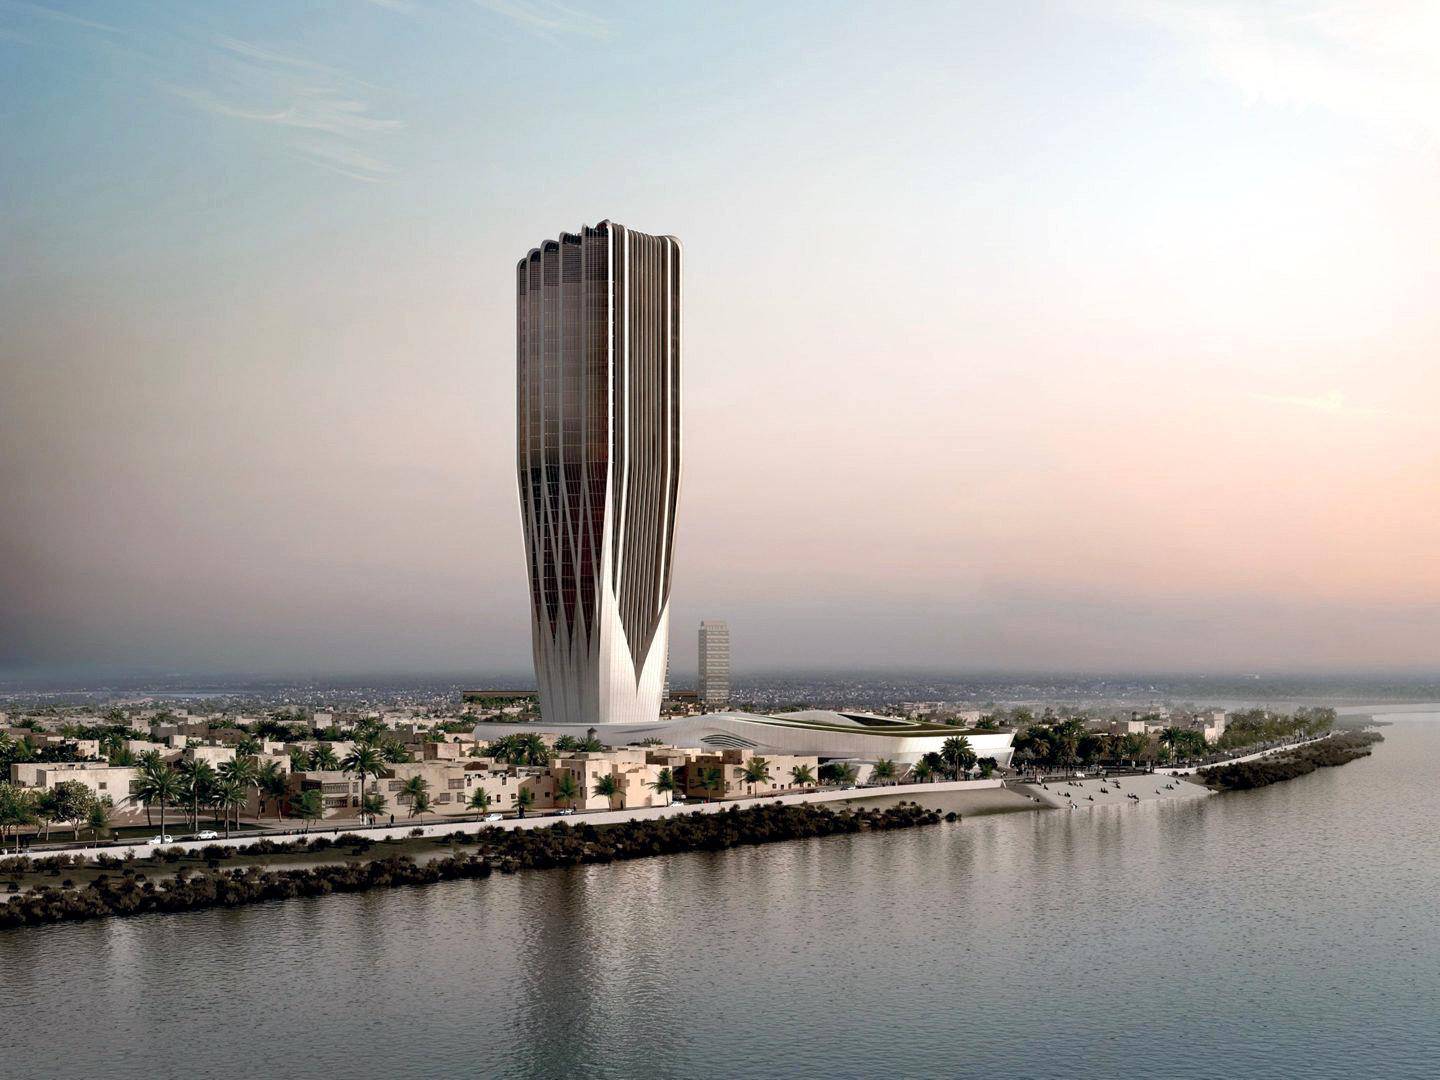 Zaha Hadid’s Central Bank of Iraq (CBI) design will be A Landmark Tower & Financial Monument on the shores of the Tigris River in Baghdad, Iraq. courtesy: Zaha Hadid Architects